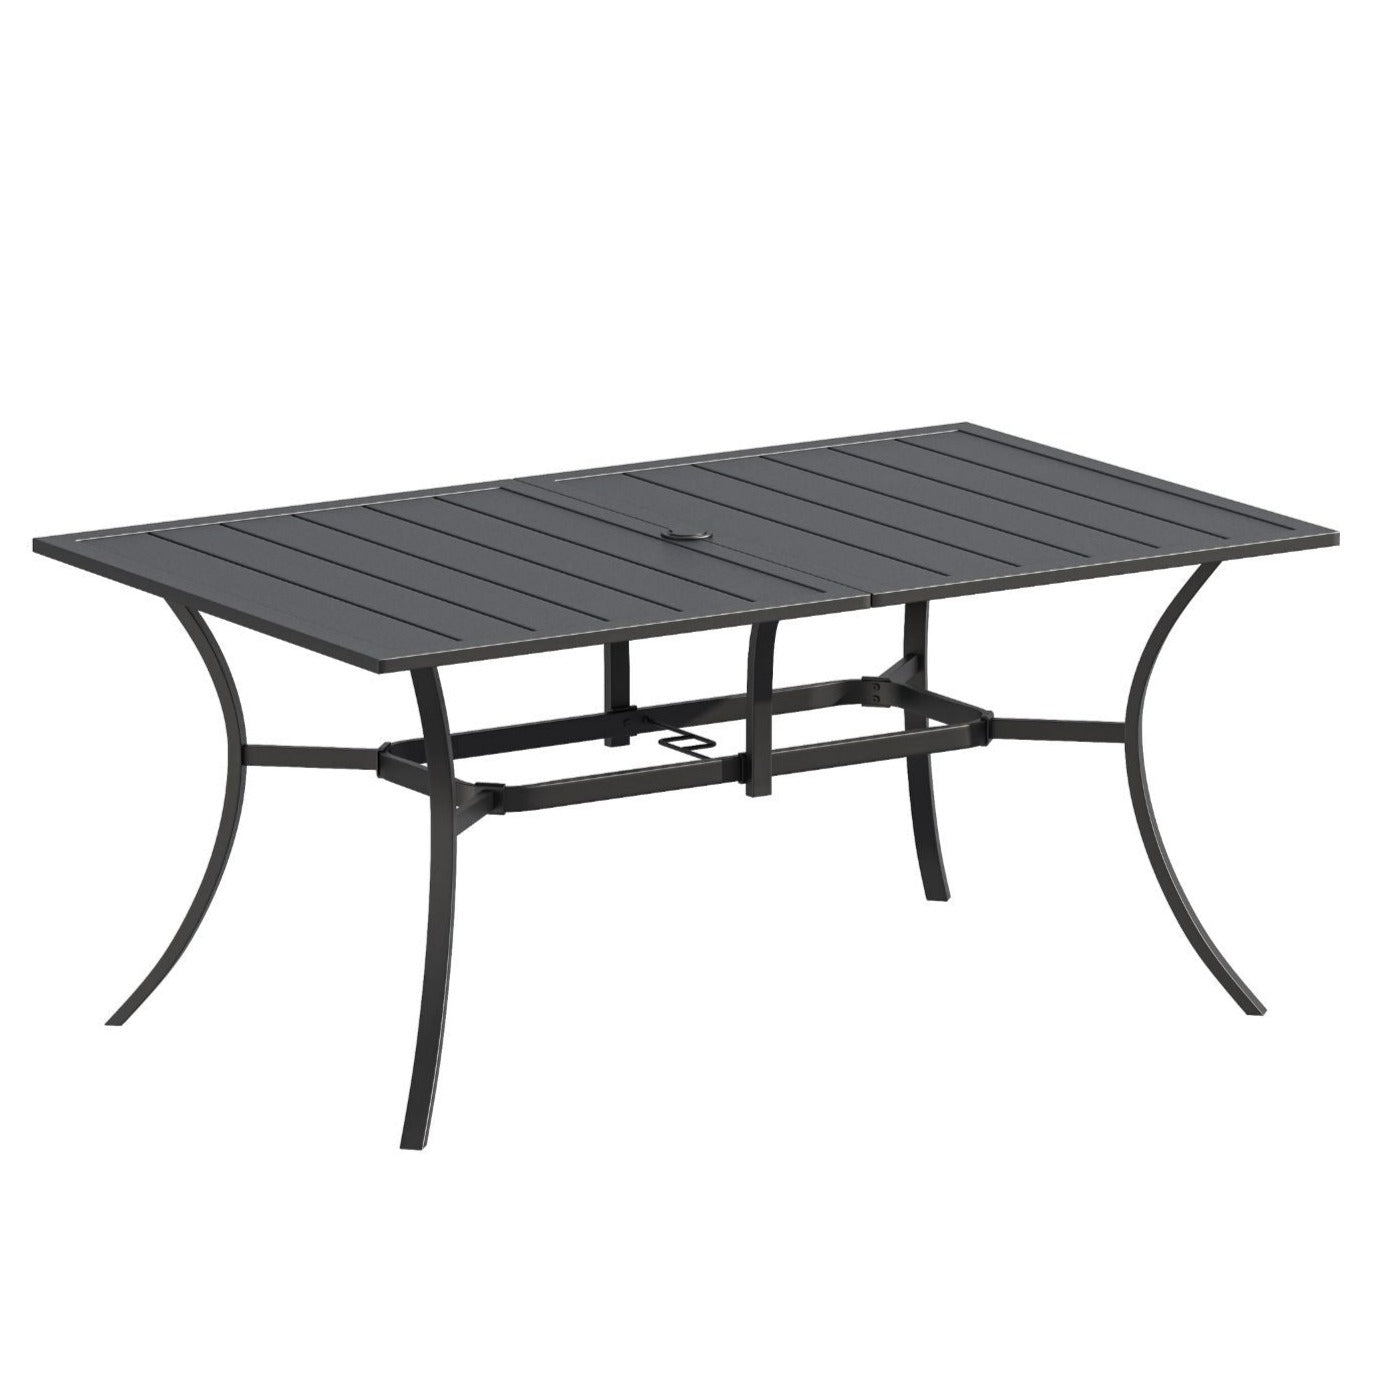 Vicllax Outdoor Dining Table for 6, Patio Metal Curved Steel Slat Table with Umbrella Hole